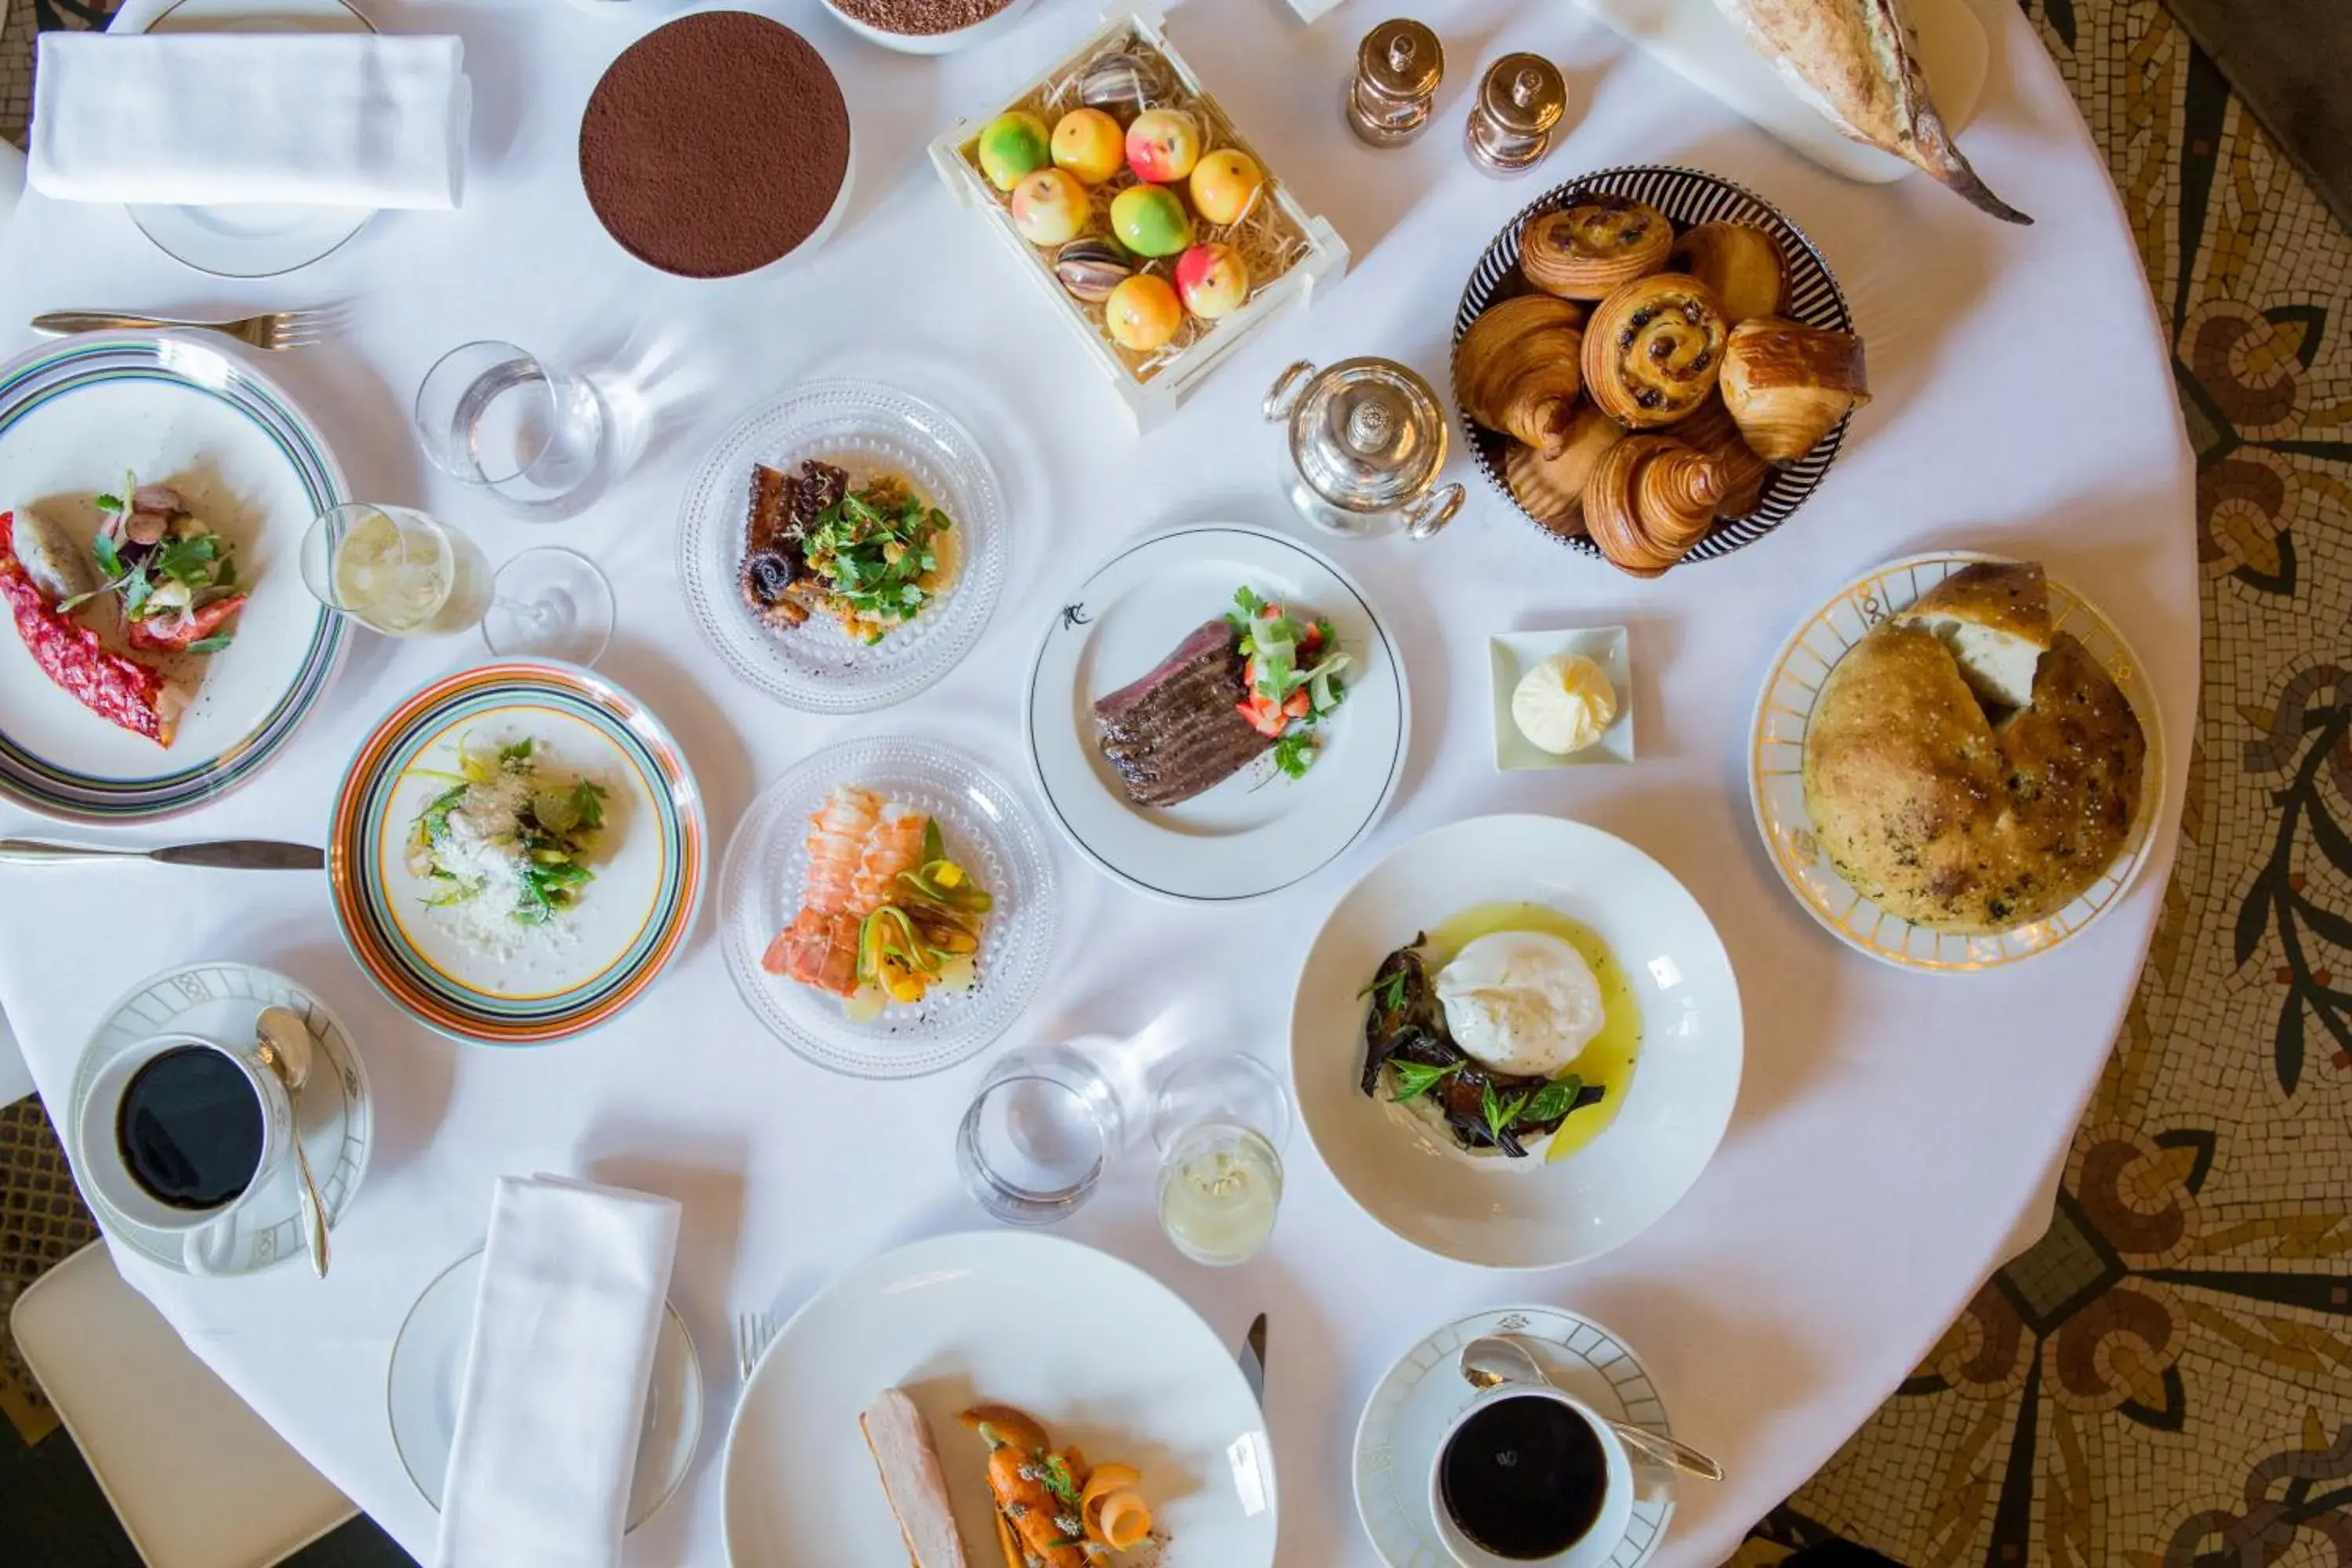 Meals, Breakfast in Le Meurice - Dorchester Collection